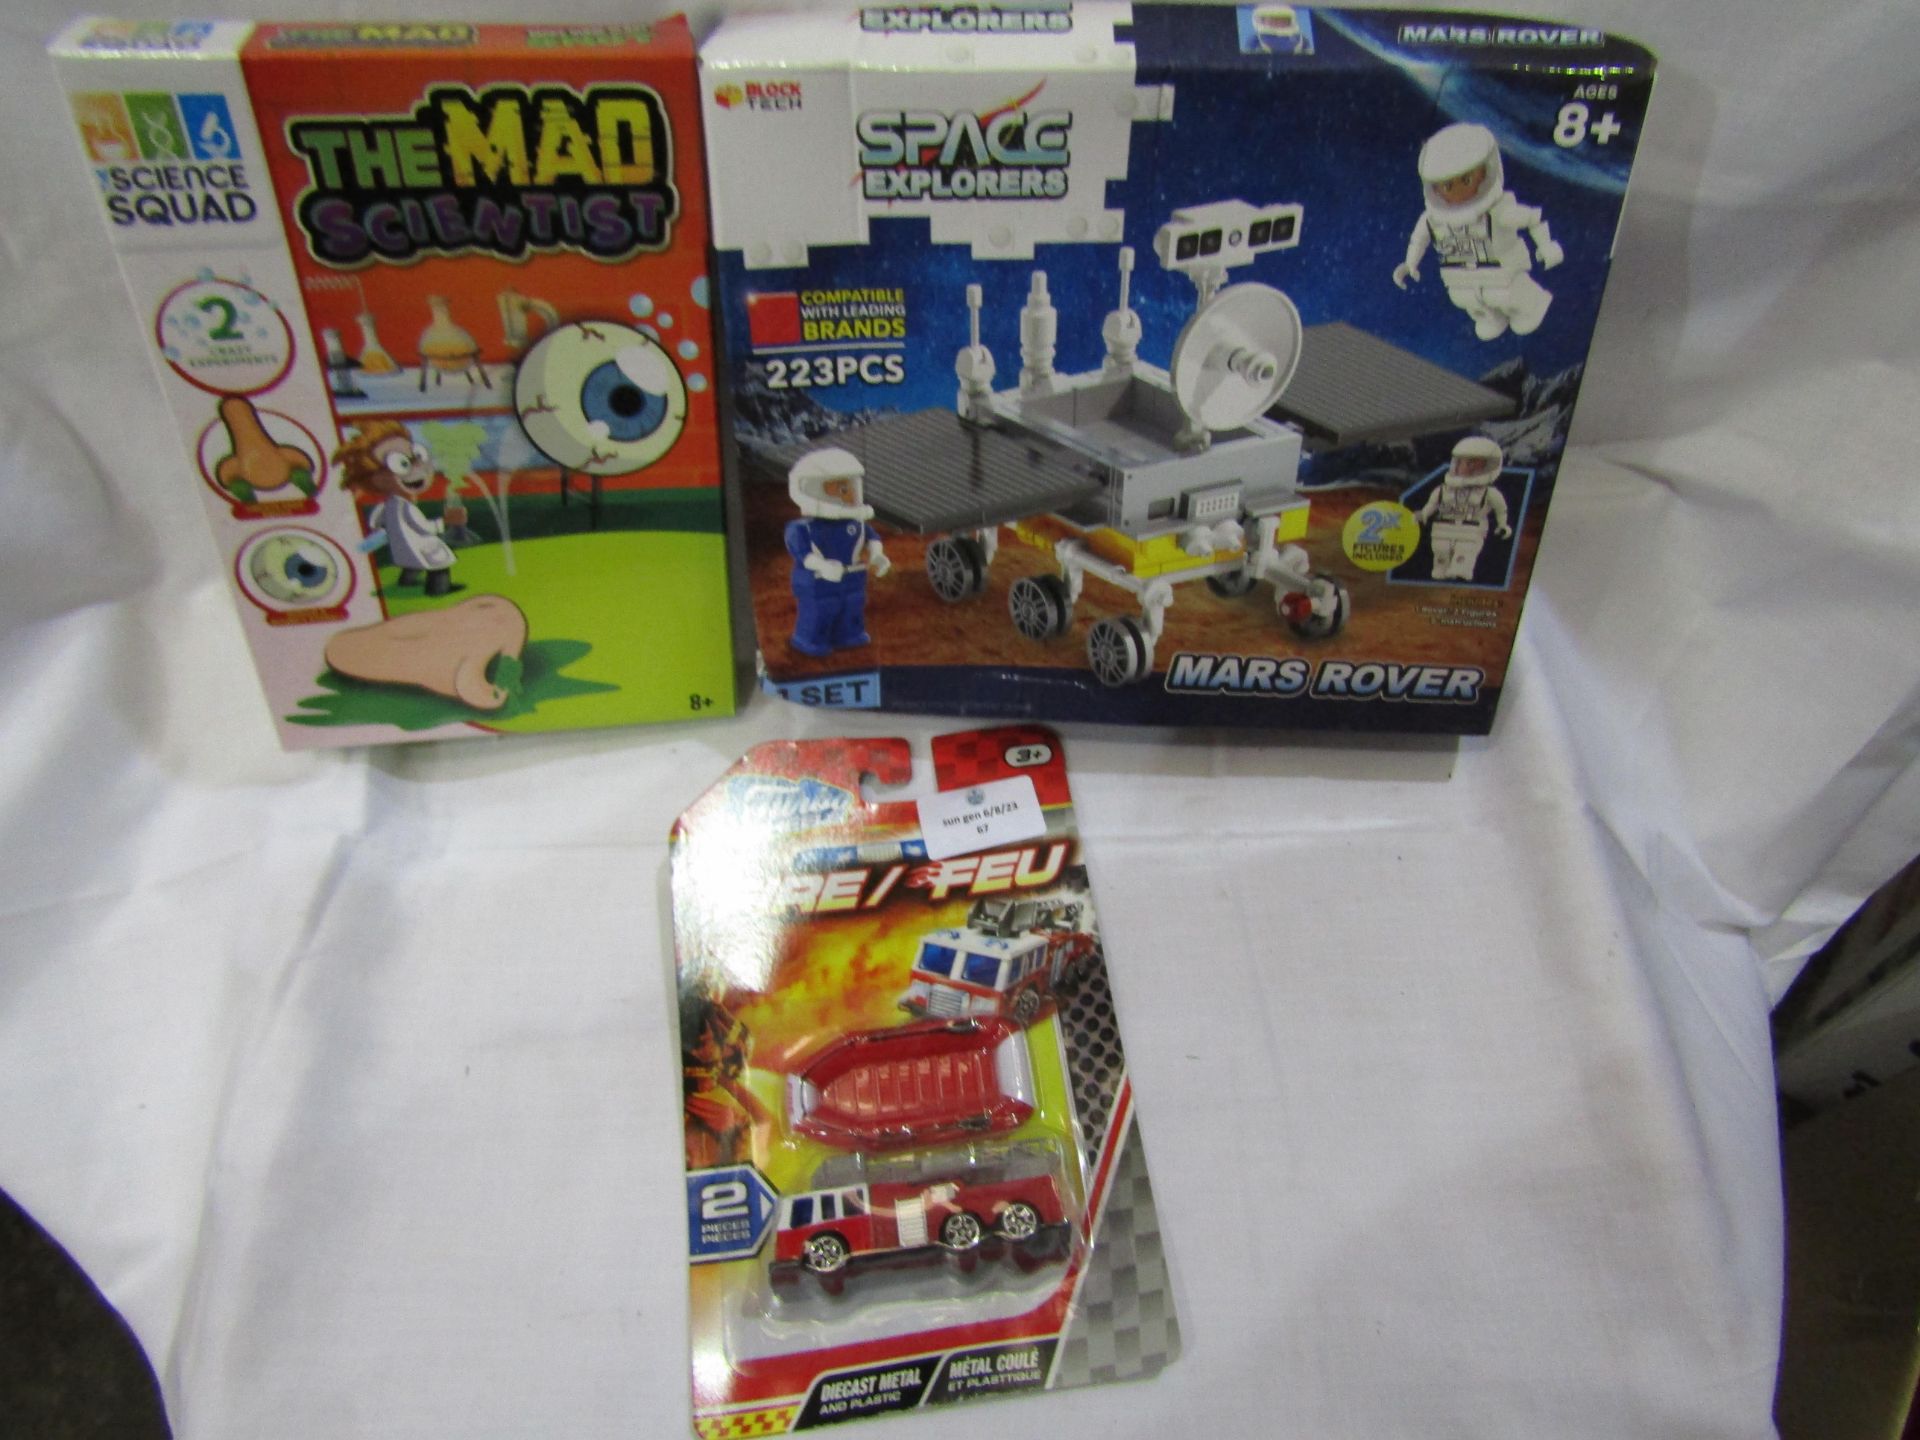 3 X Items Being Turbo Cars Fire Enging The Mad Scientist & Space Explorers All Packaged